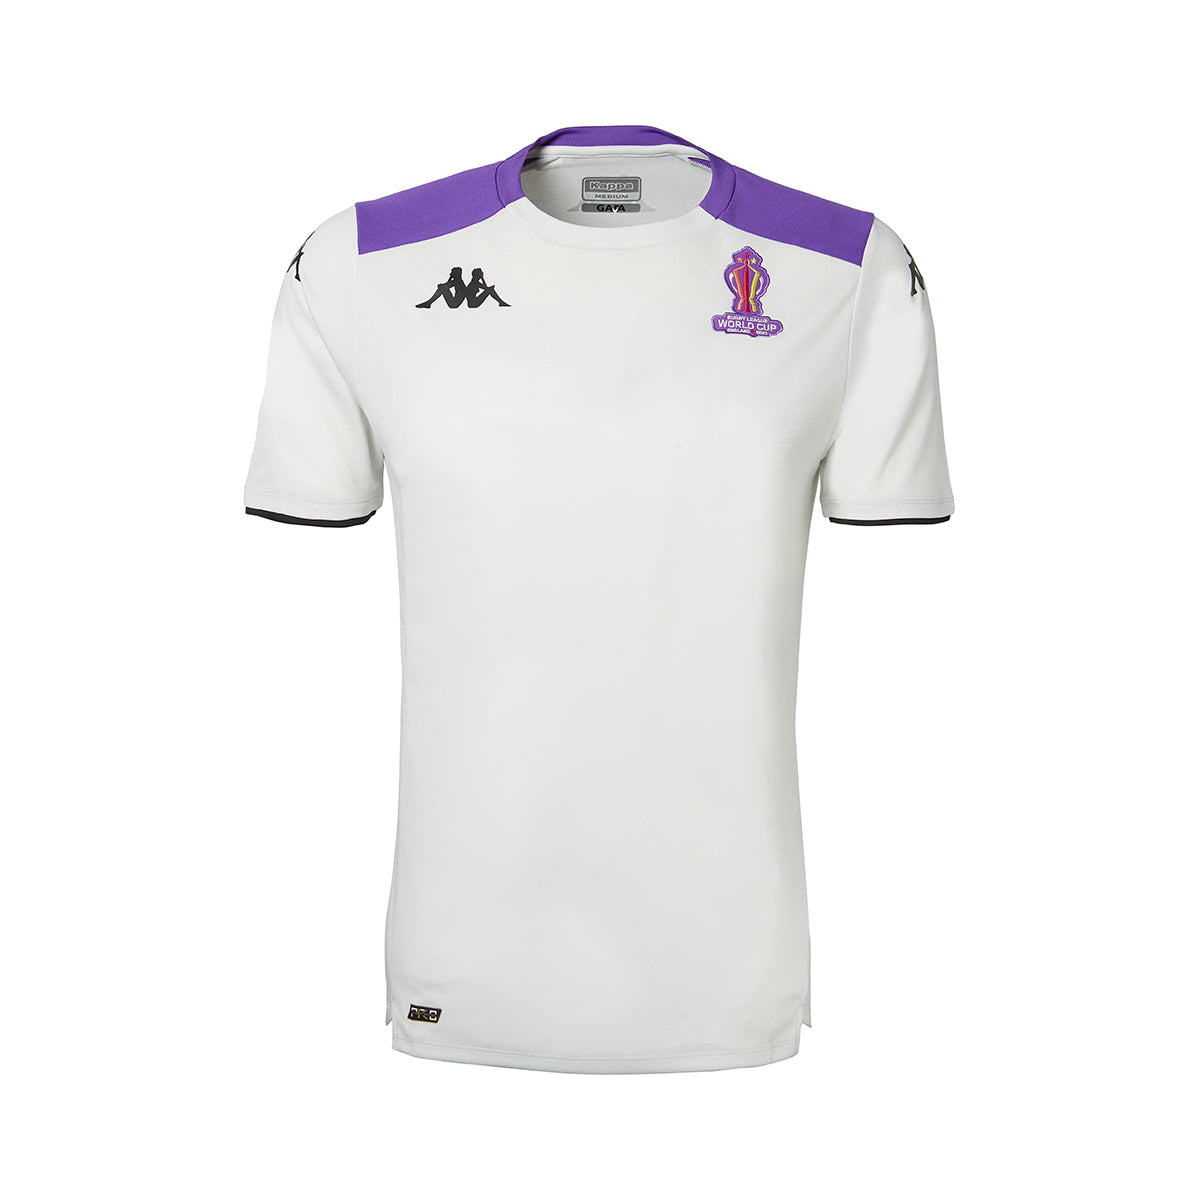 Maillot Abou Pro 5 Rugby World Cup Gris homme - image 1